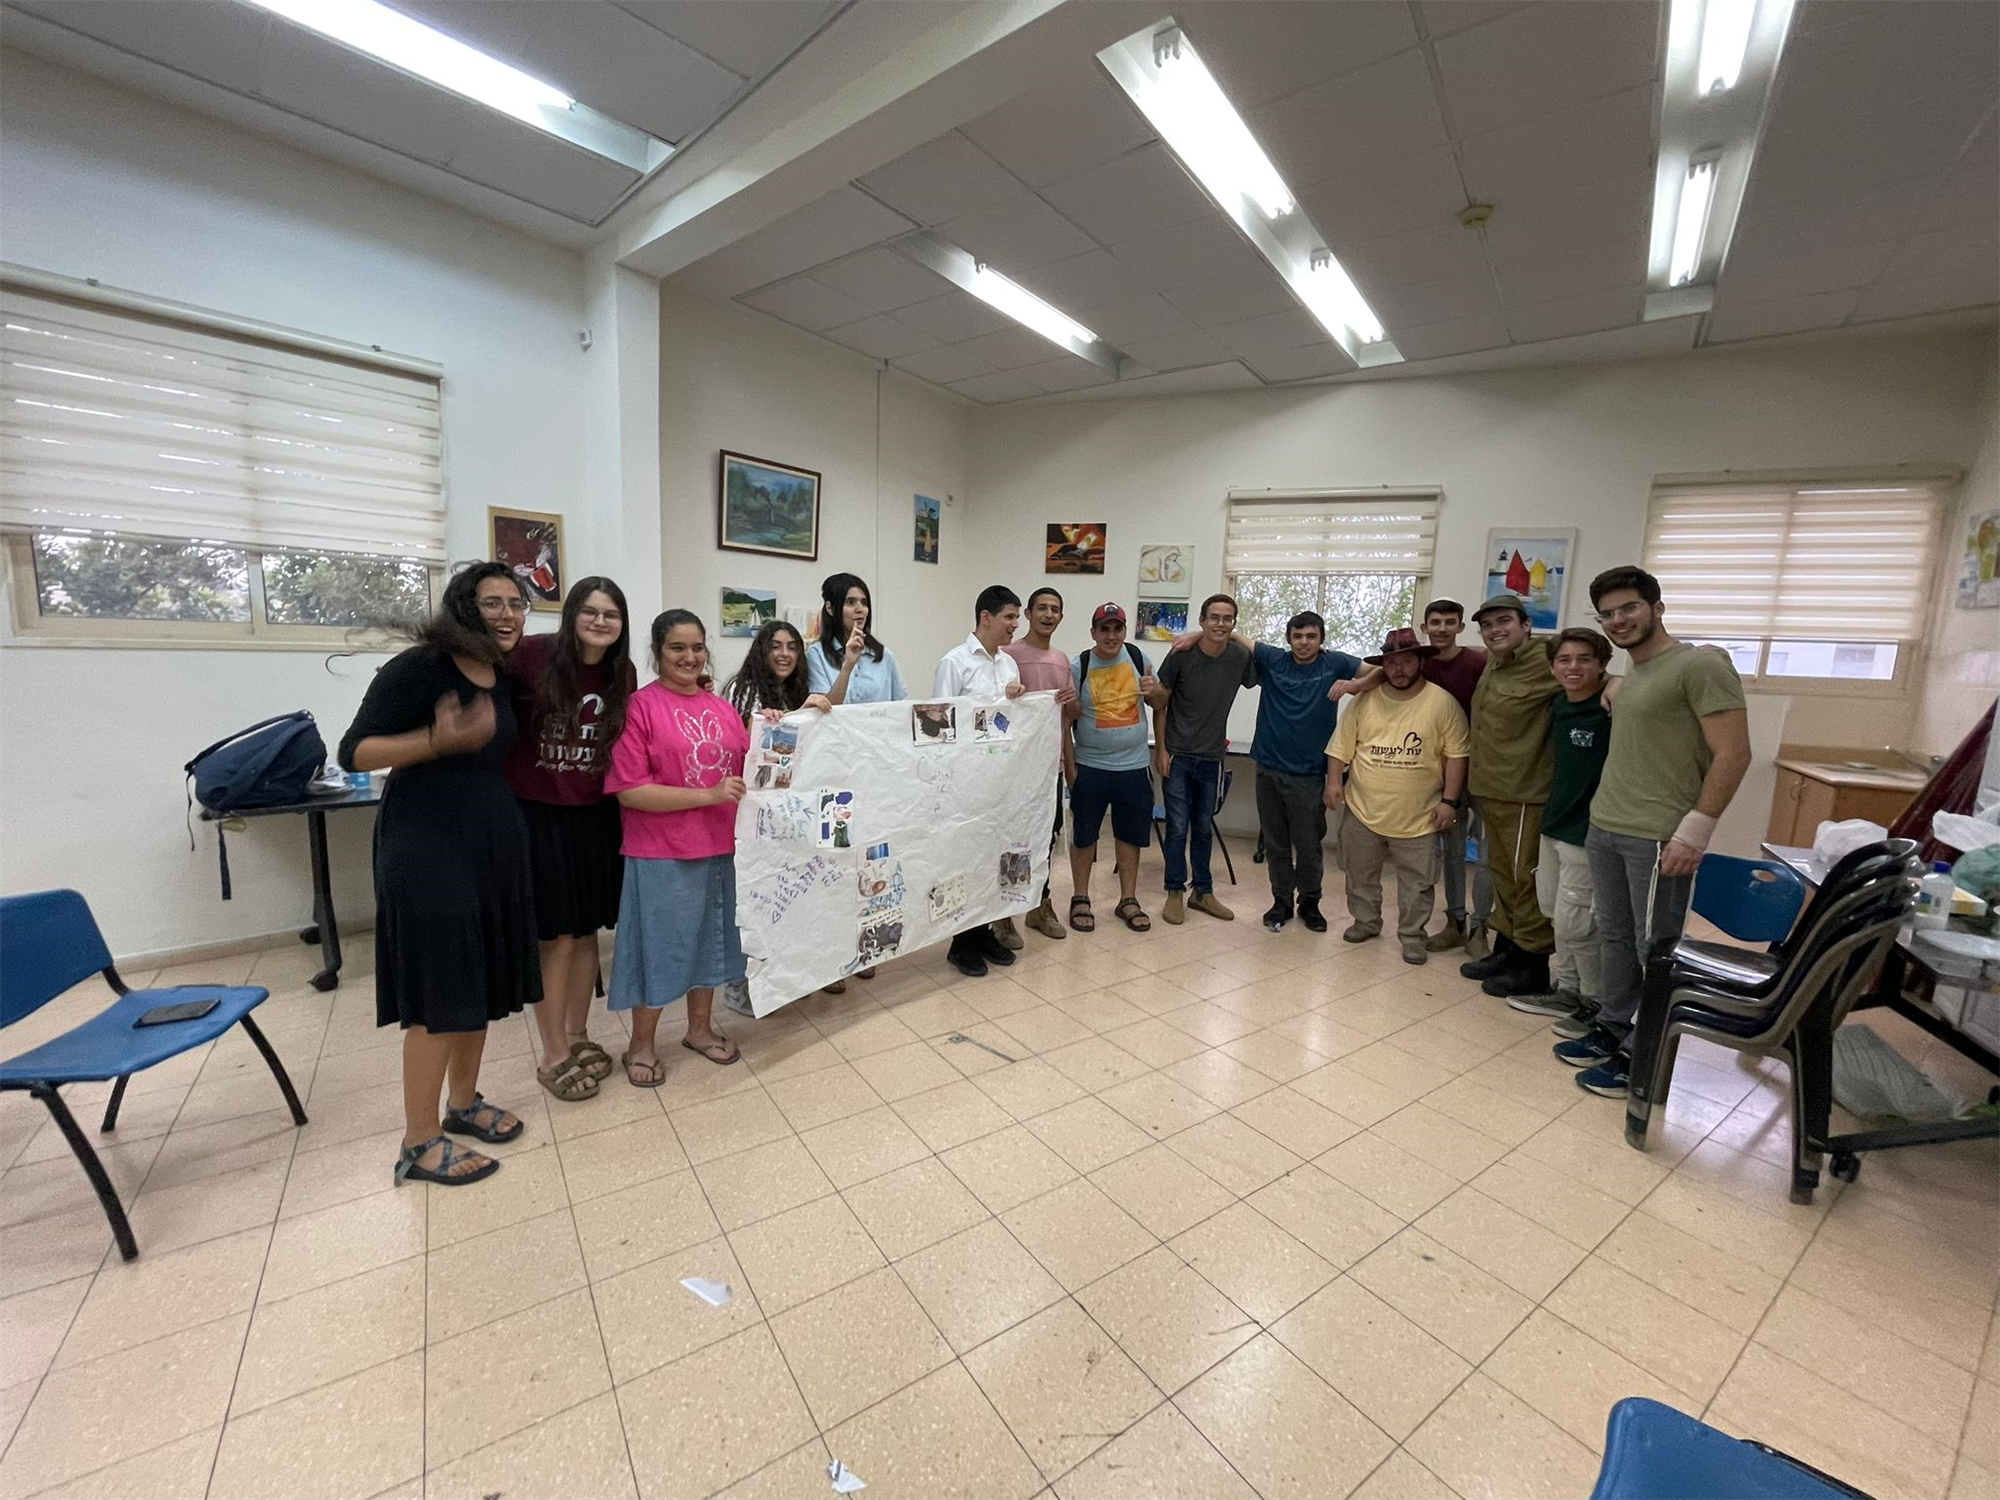 New Play Center for Teens in Beit SHemesh